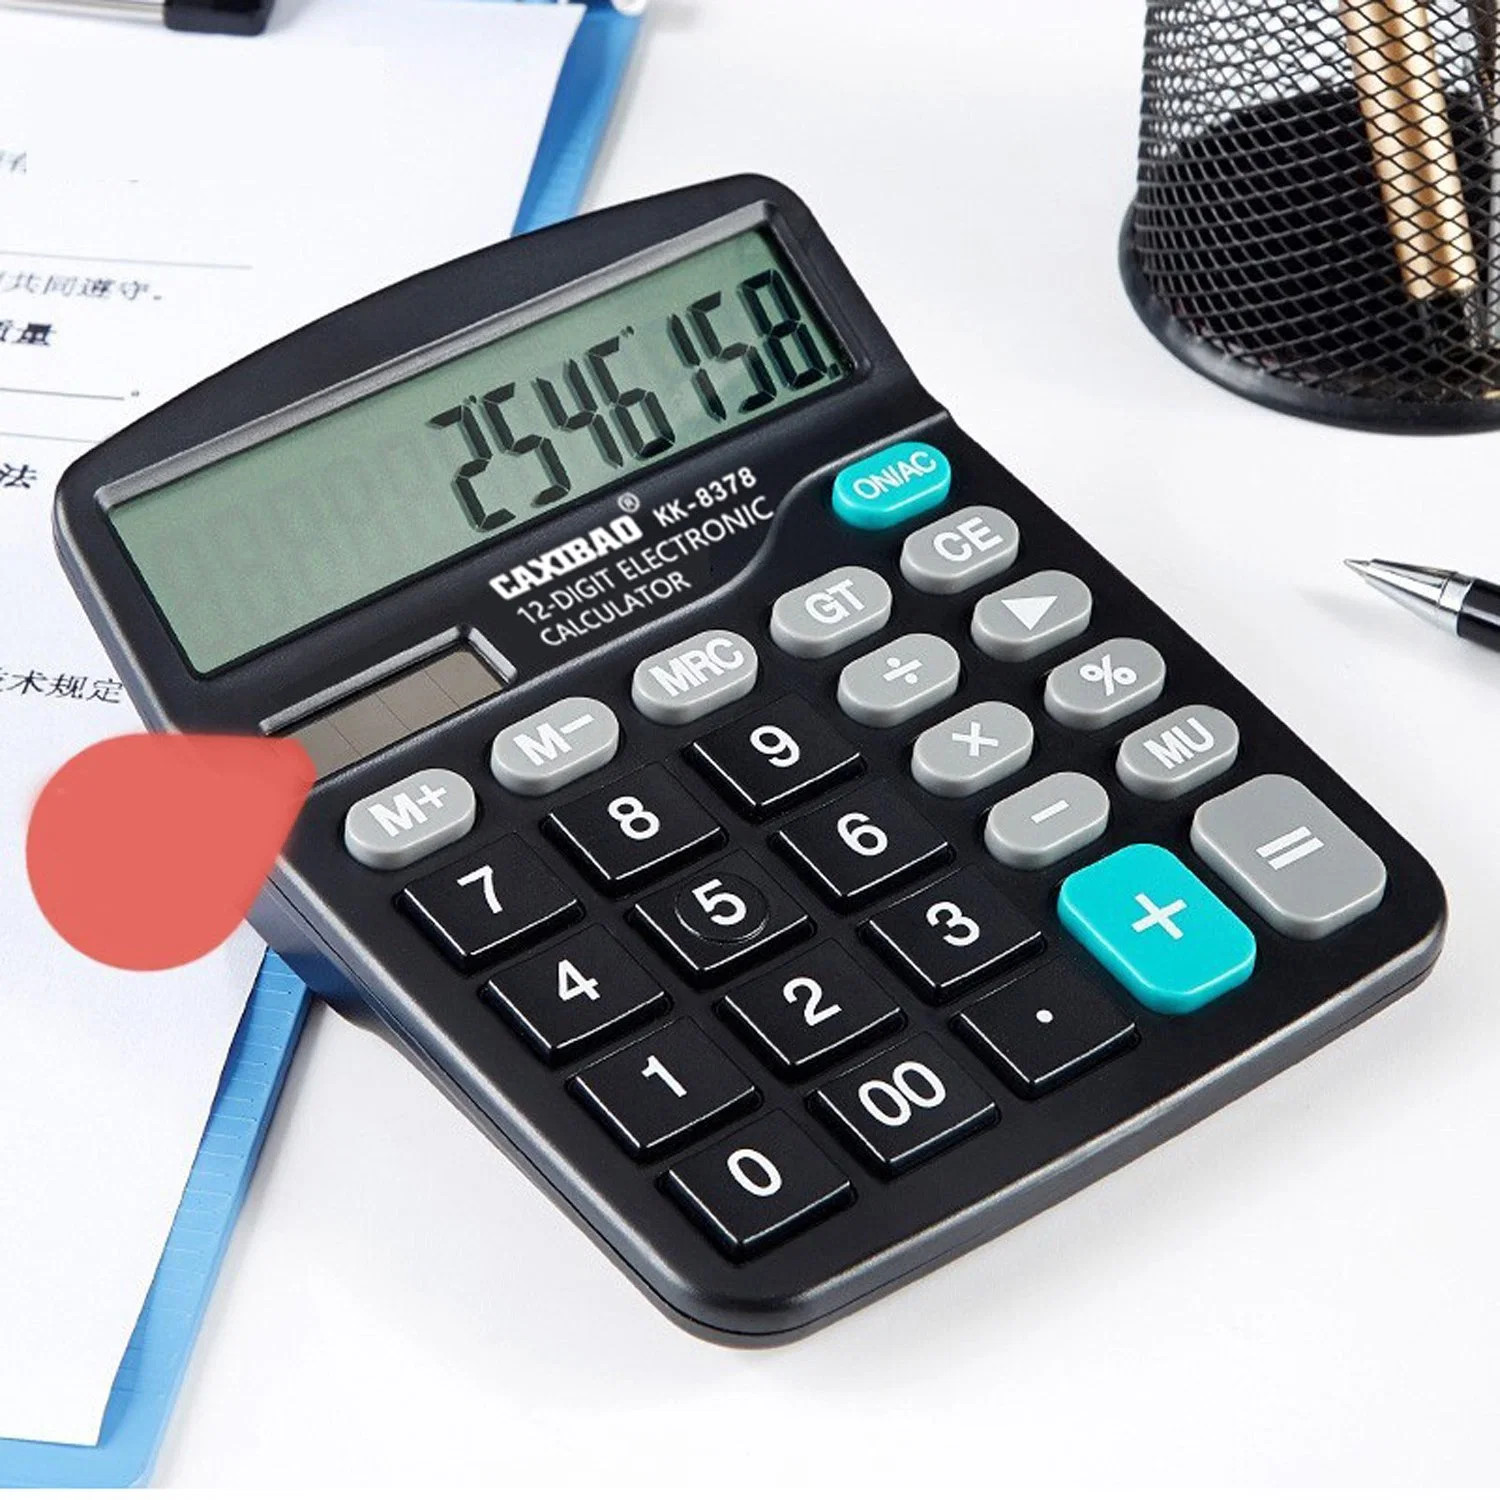 Desktop Calculators with Huge 5-Inch LCD Display Screen Giant Responsive Buttons Battery and Solar Powered Perfect for Home Office Account